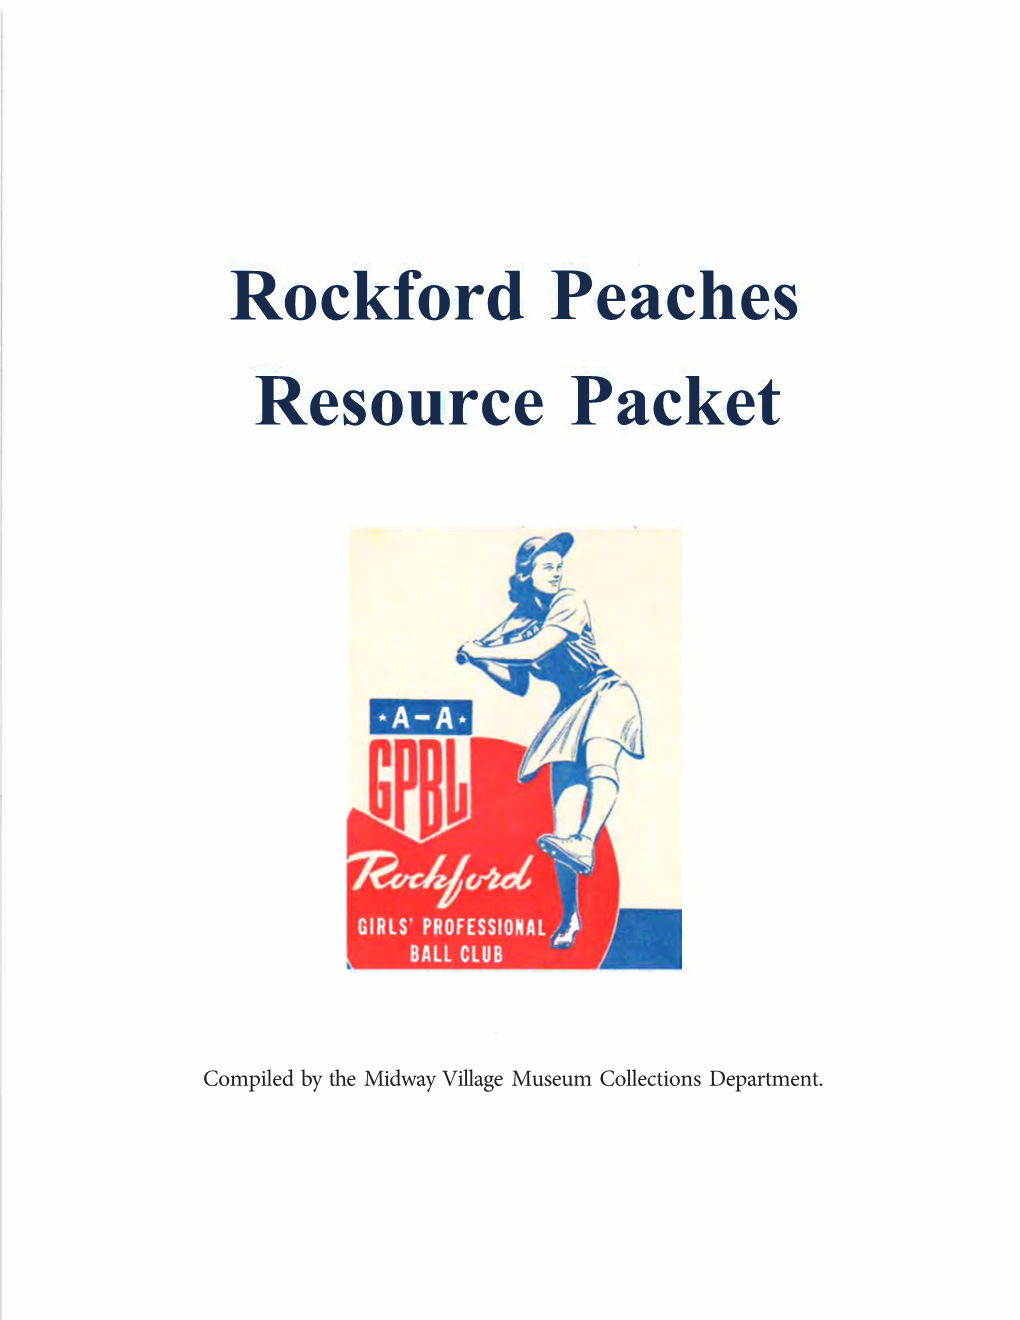 Rockford Peaches Resource Packet